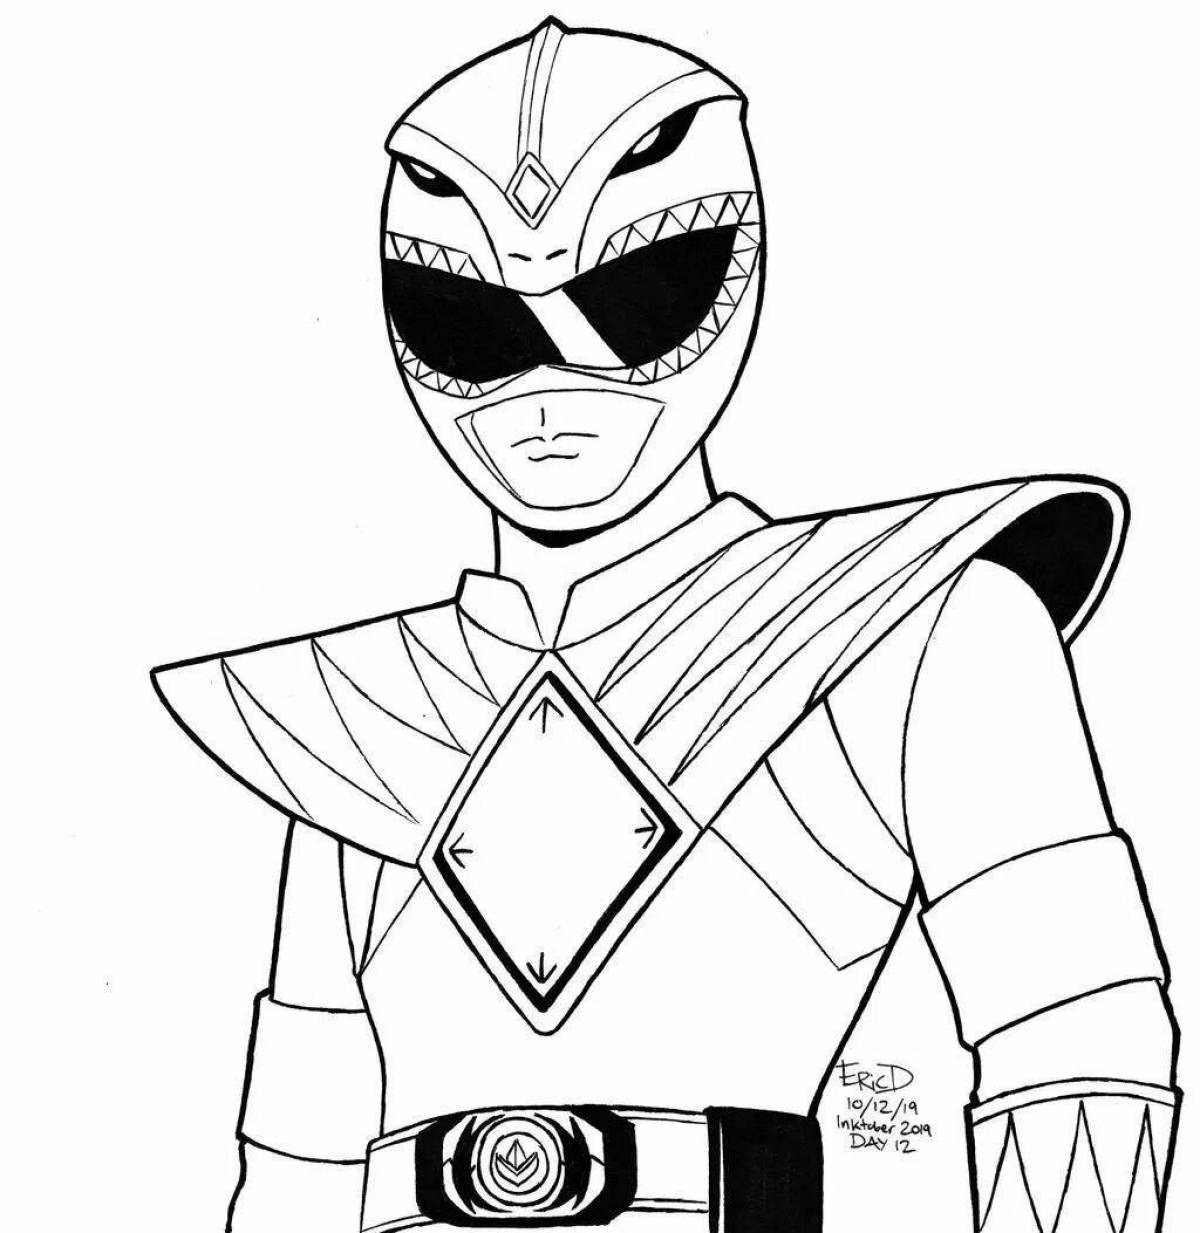 Amazing Roger Ranger coloring book